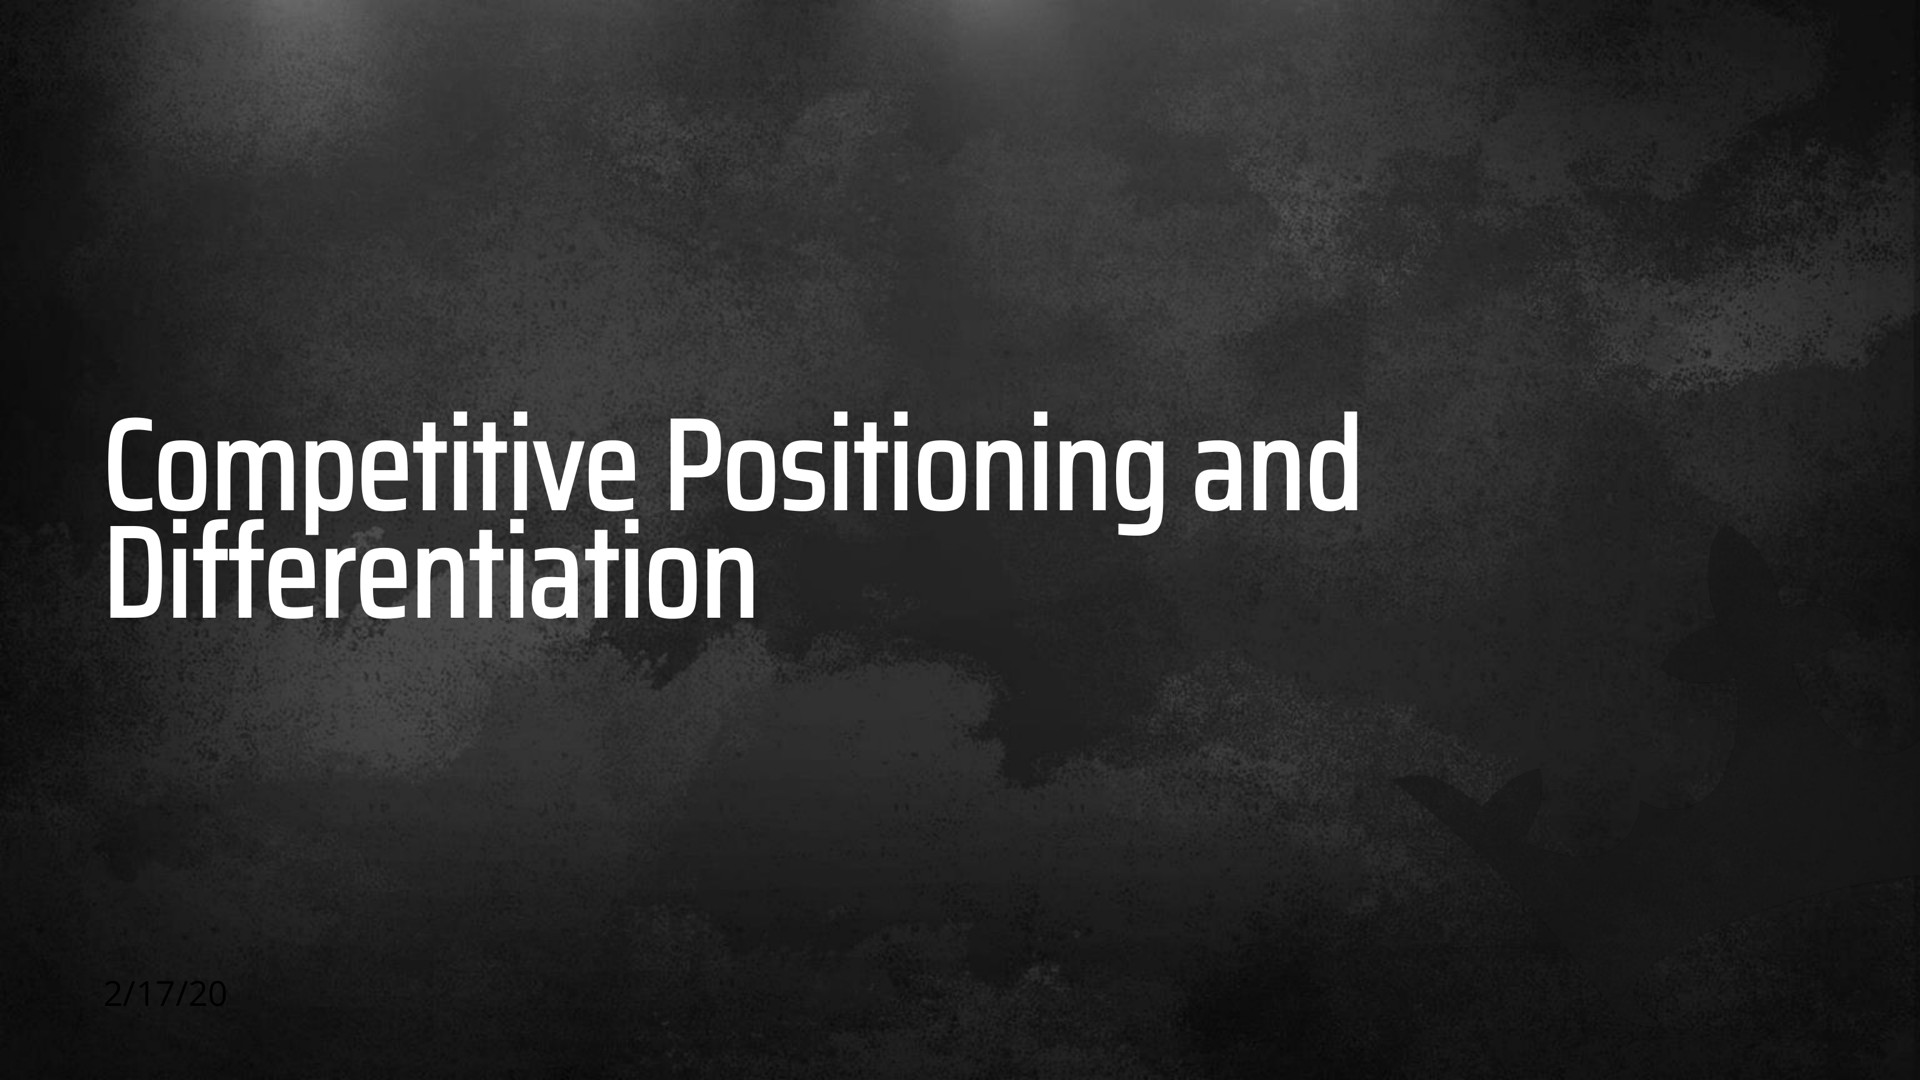 competitive positioning and differentiation | DraftKings